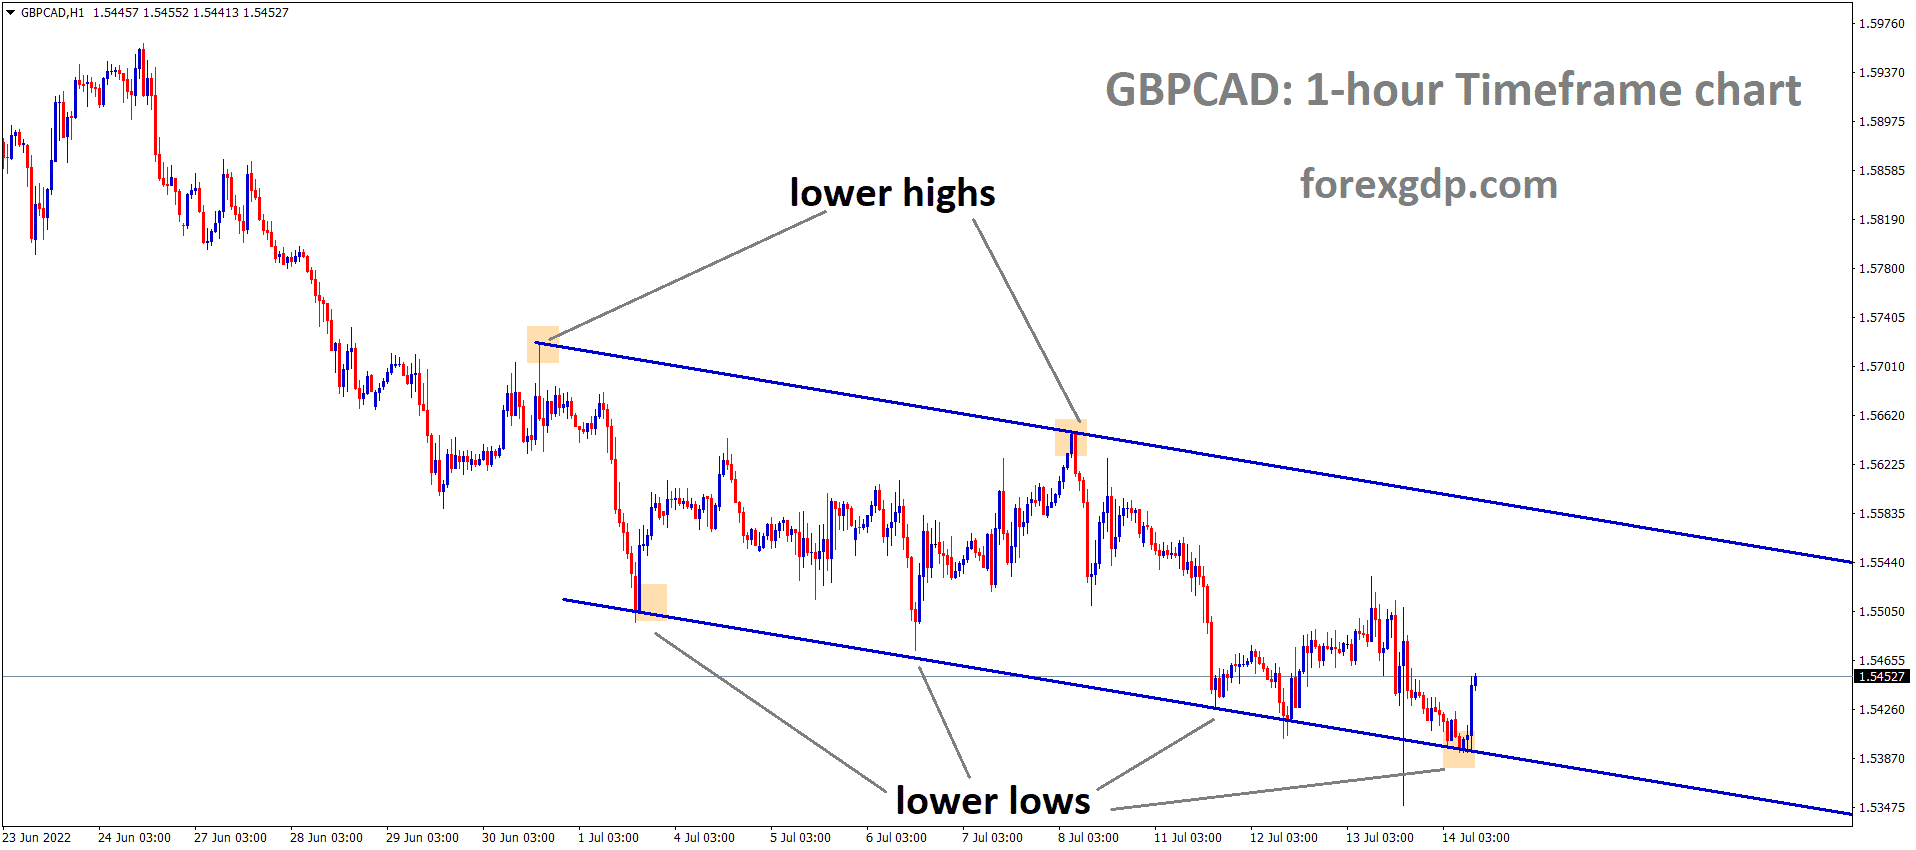 GBPCAD H1 TF analysis Market is moving in the Descending channel and the market has rebounded from the lower low area of the channel